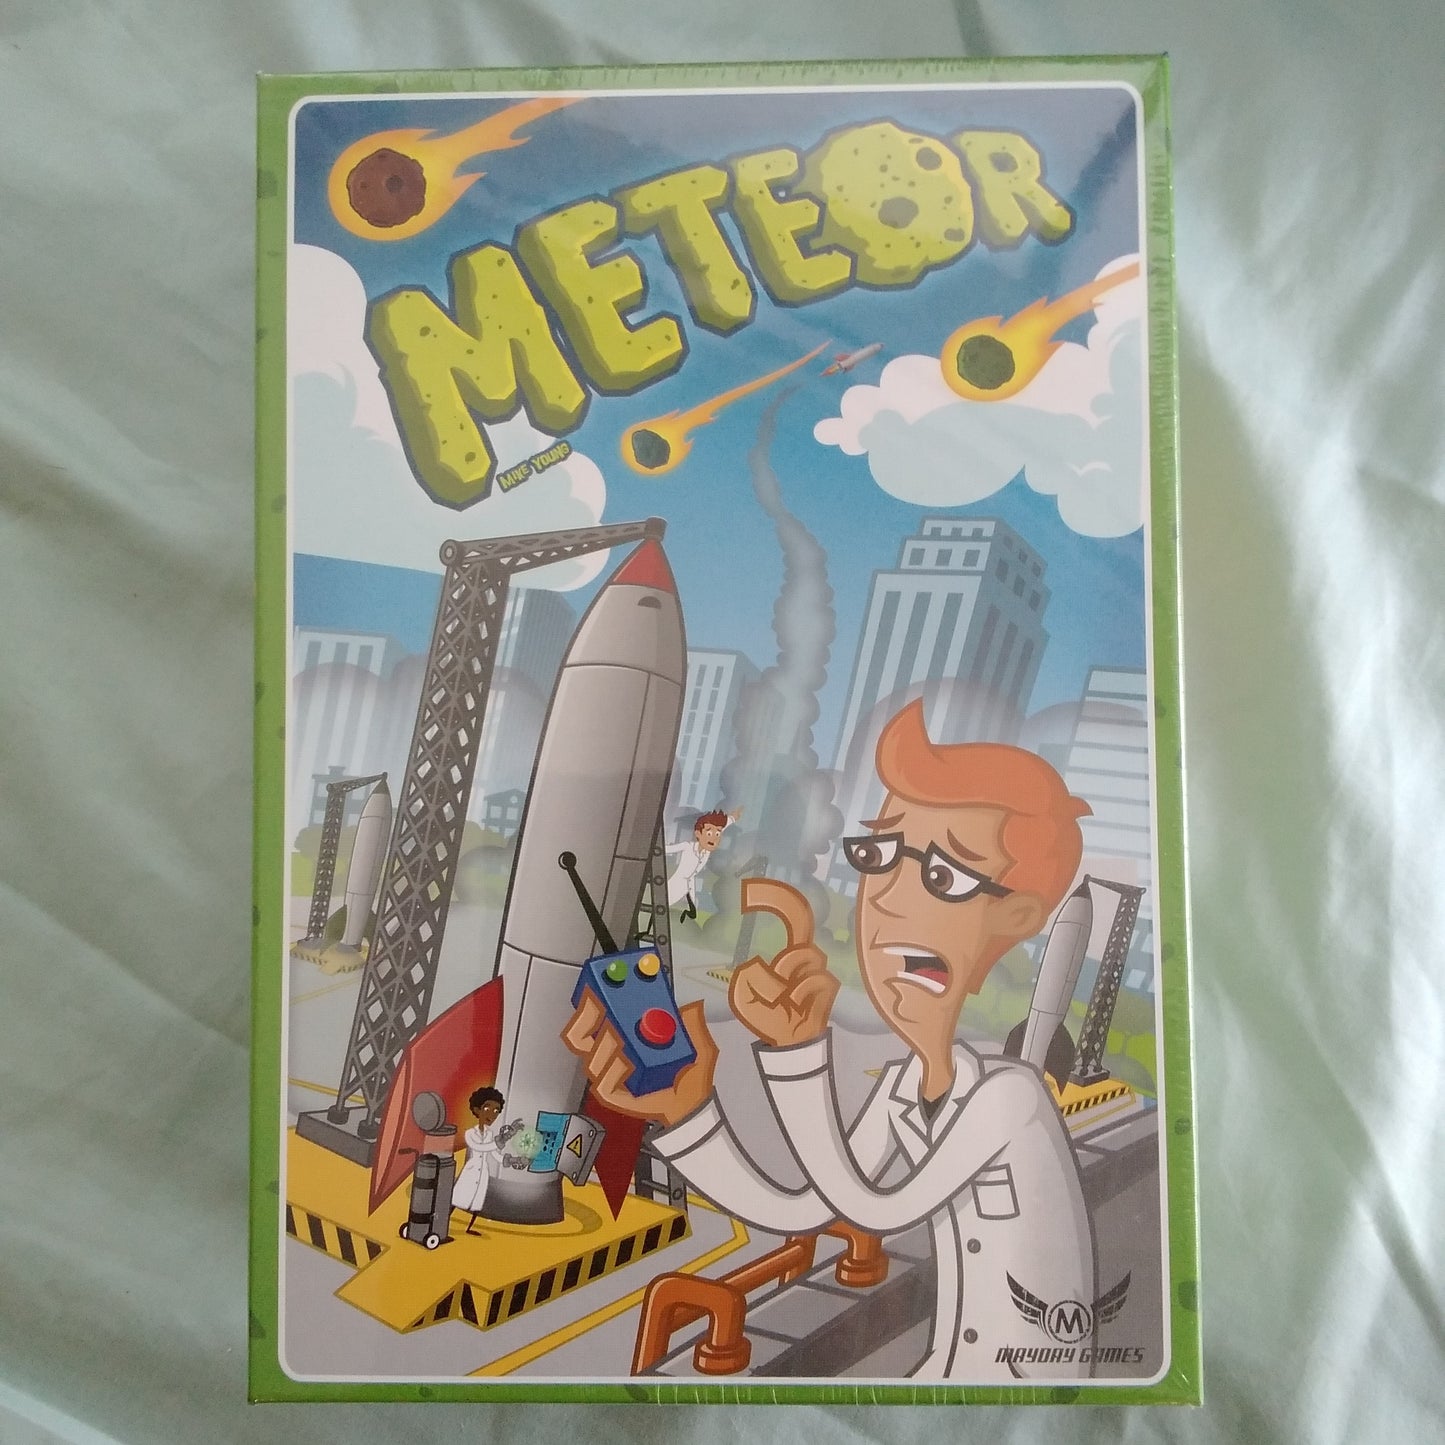 Meteor Card Game by Mayday Games - NEW